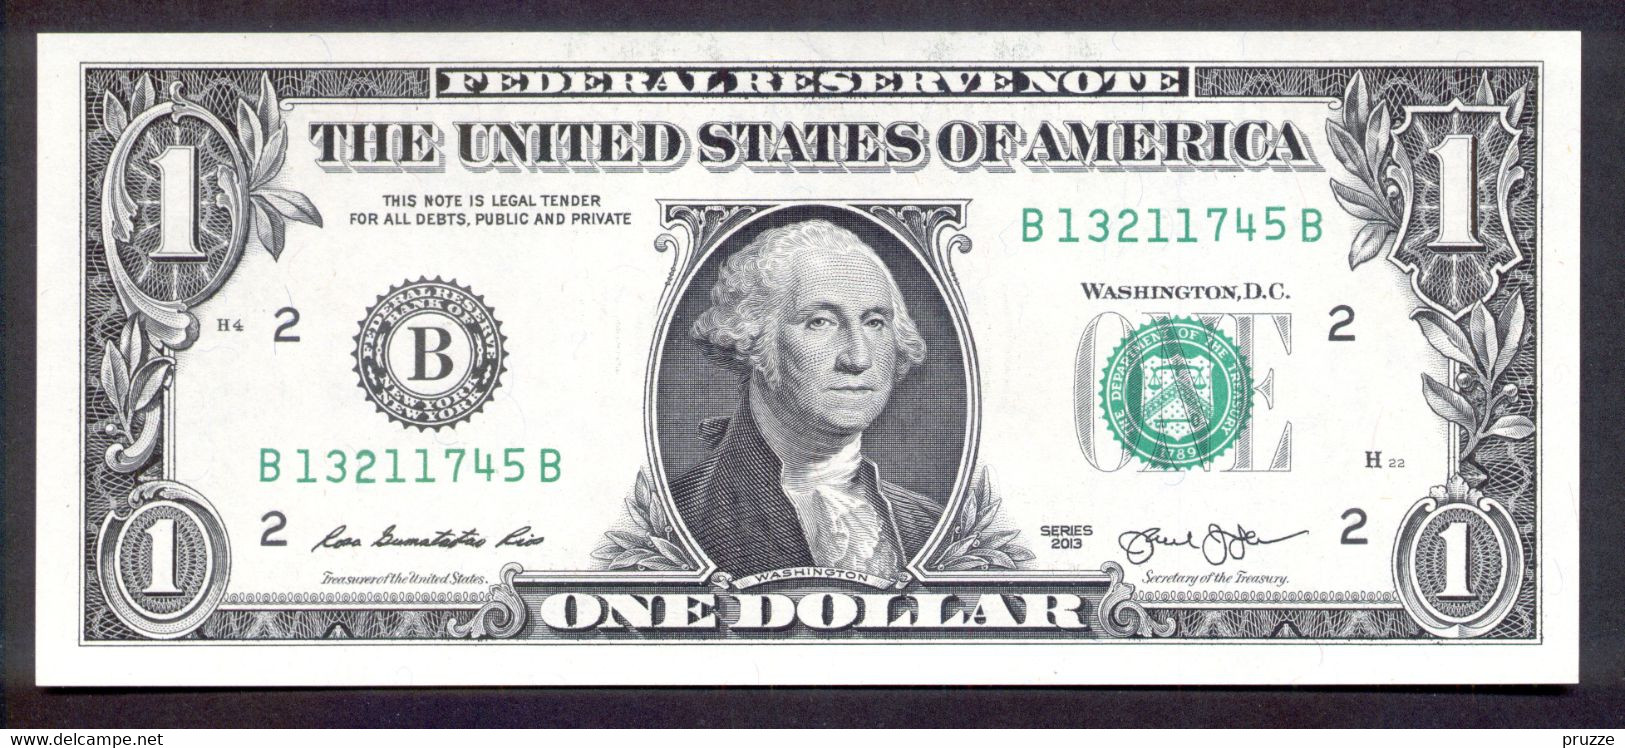 USA 2013, Federal Reserve Note, 1 $, One Dollar, B = New York, B13211745B, UNC - Federal Reserve (1928-...)